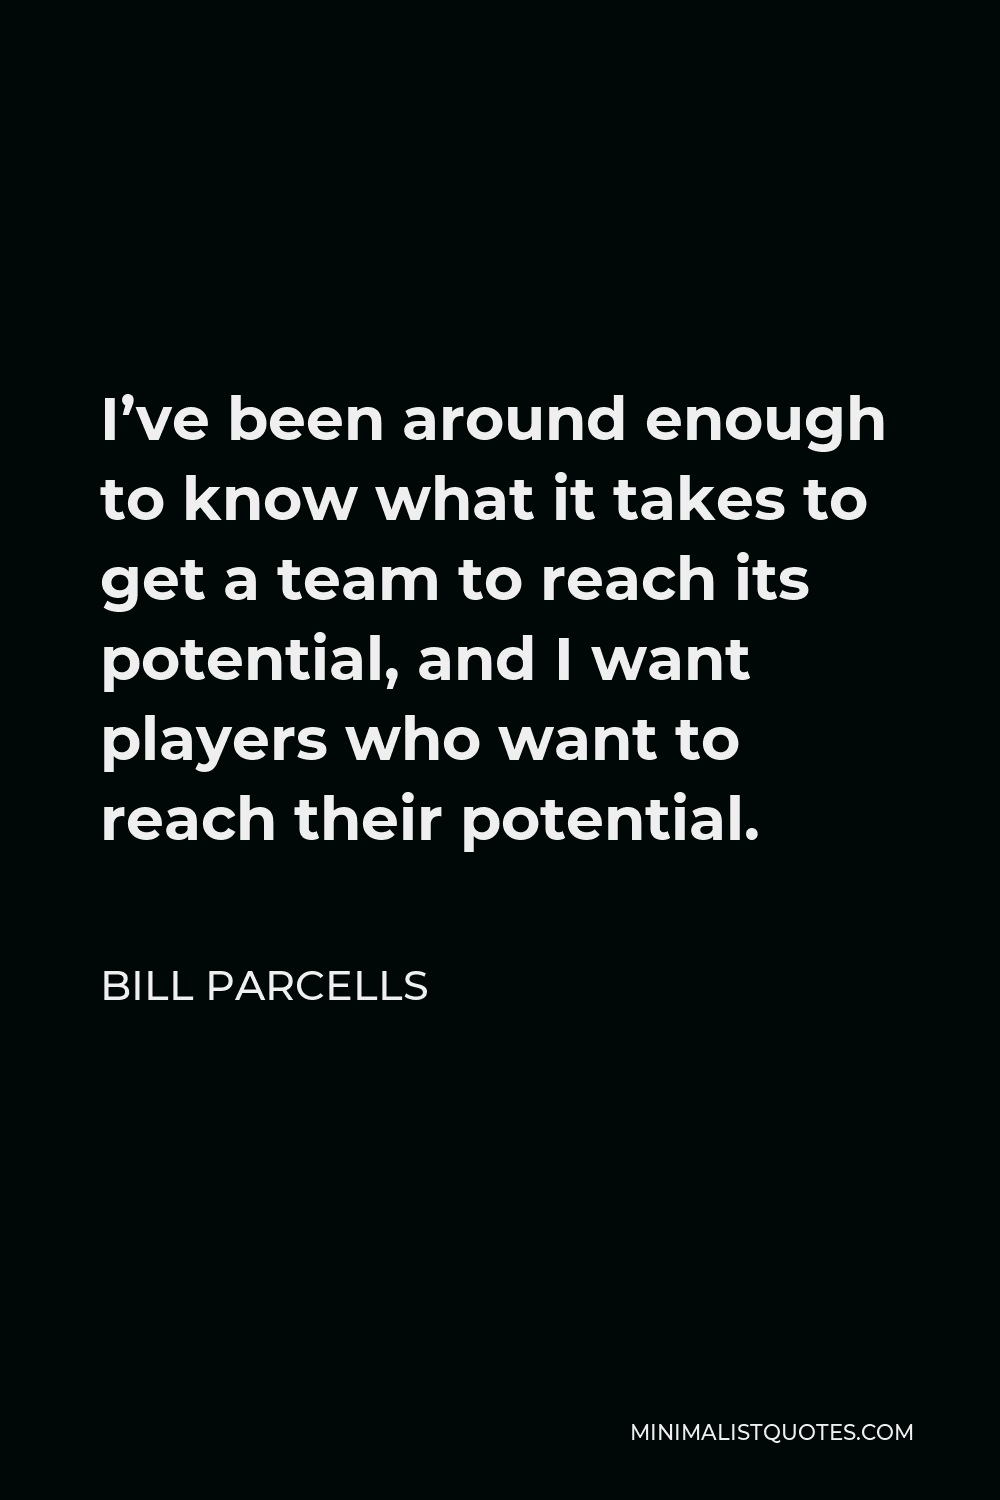 Bill Parcells Quote - I’ve been around enough to know what it takes to get a team to reach its potential, and I want players who want to reach their potential.